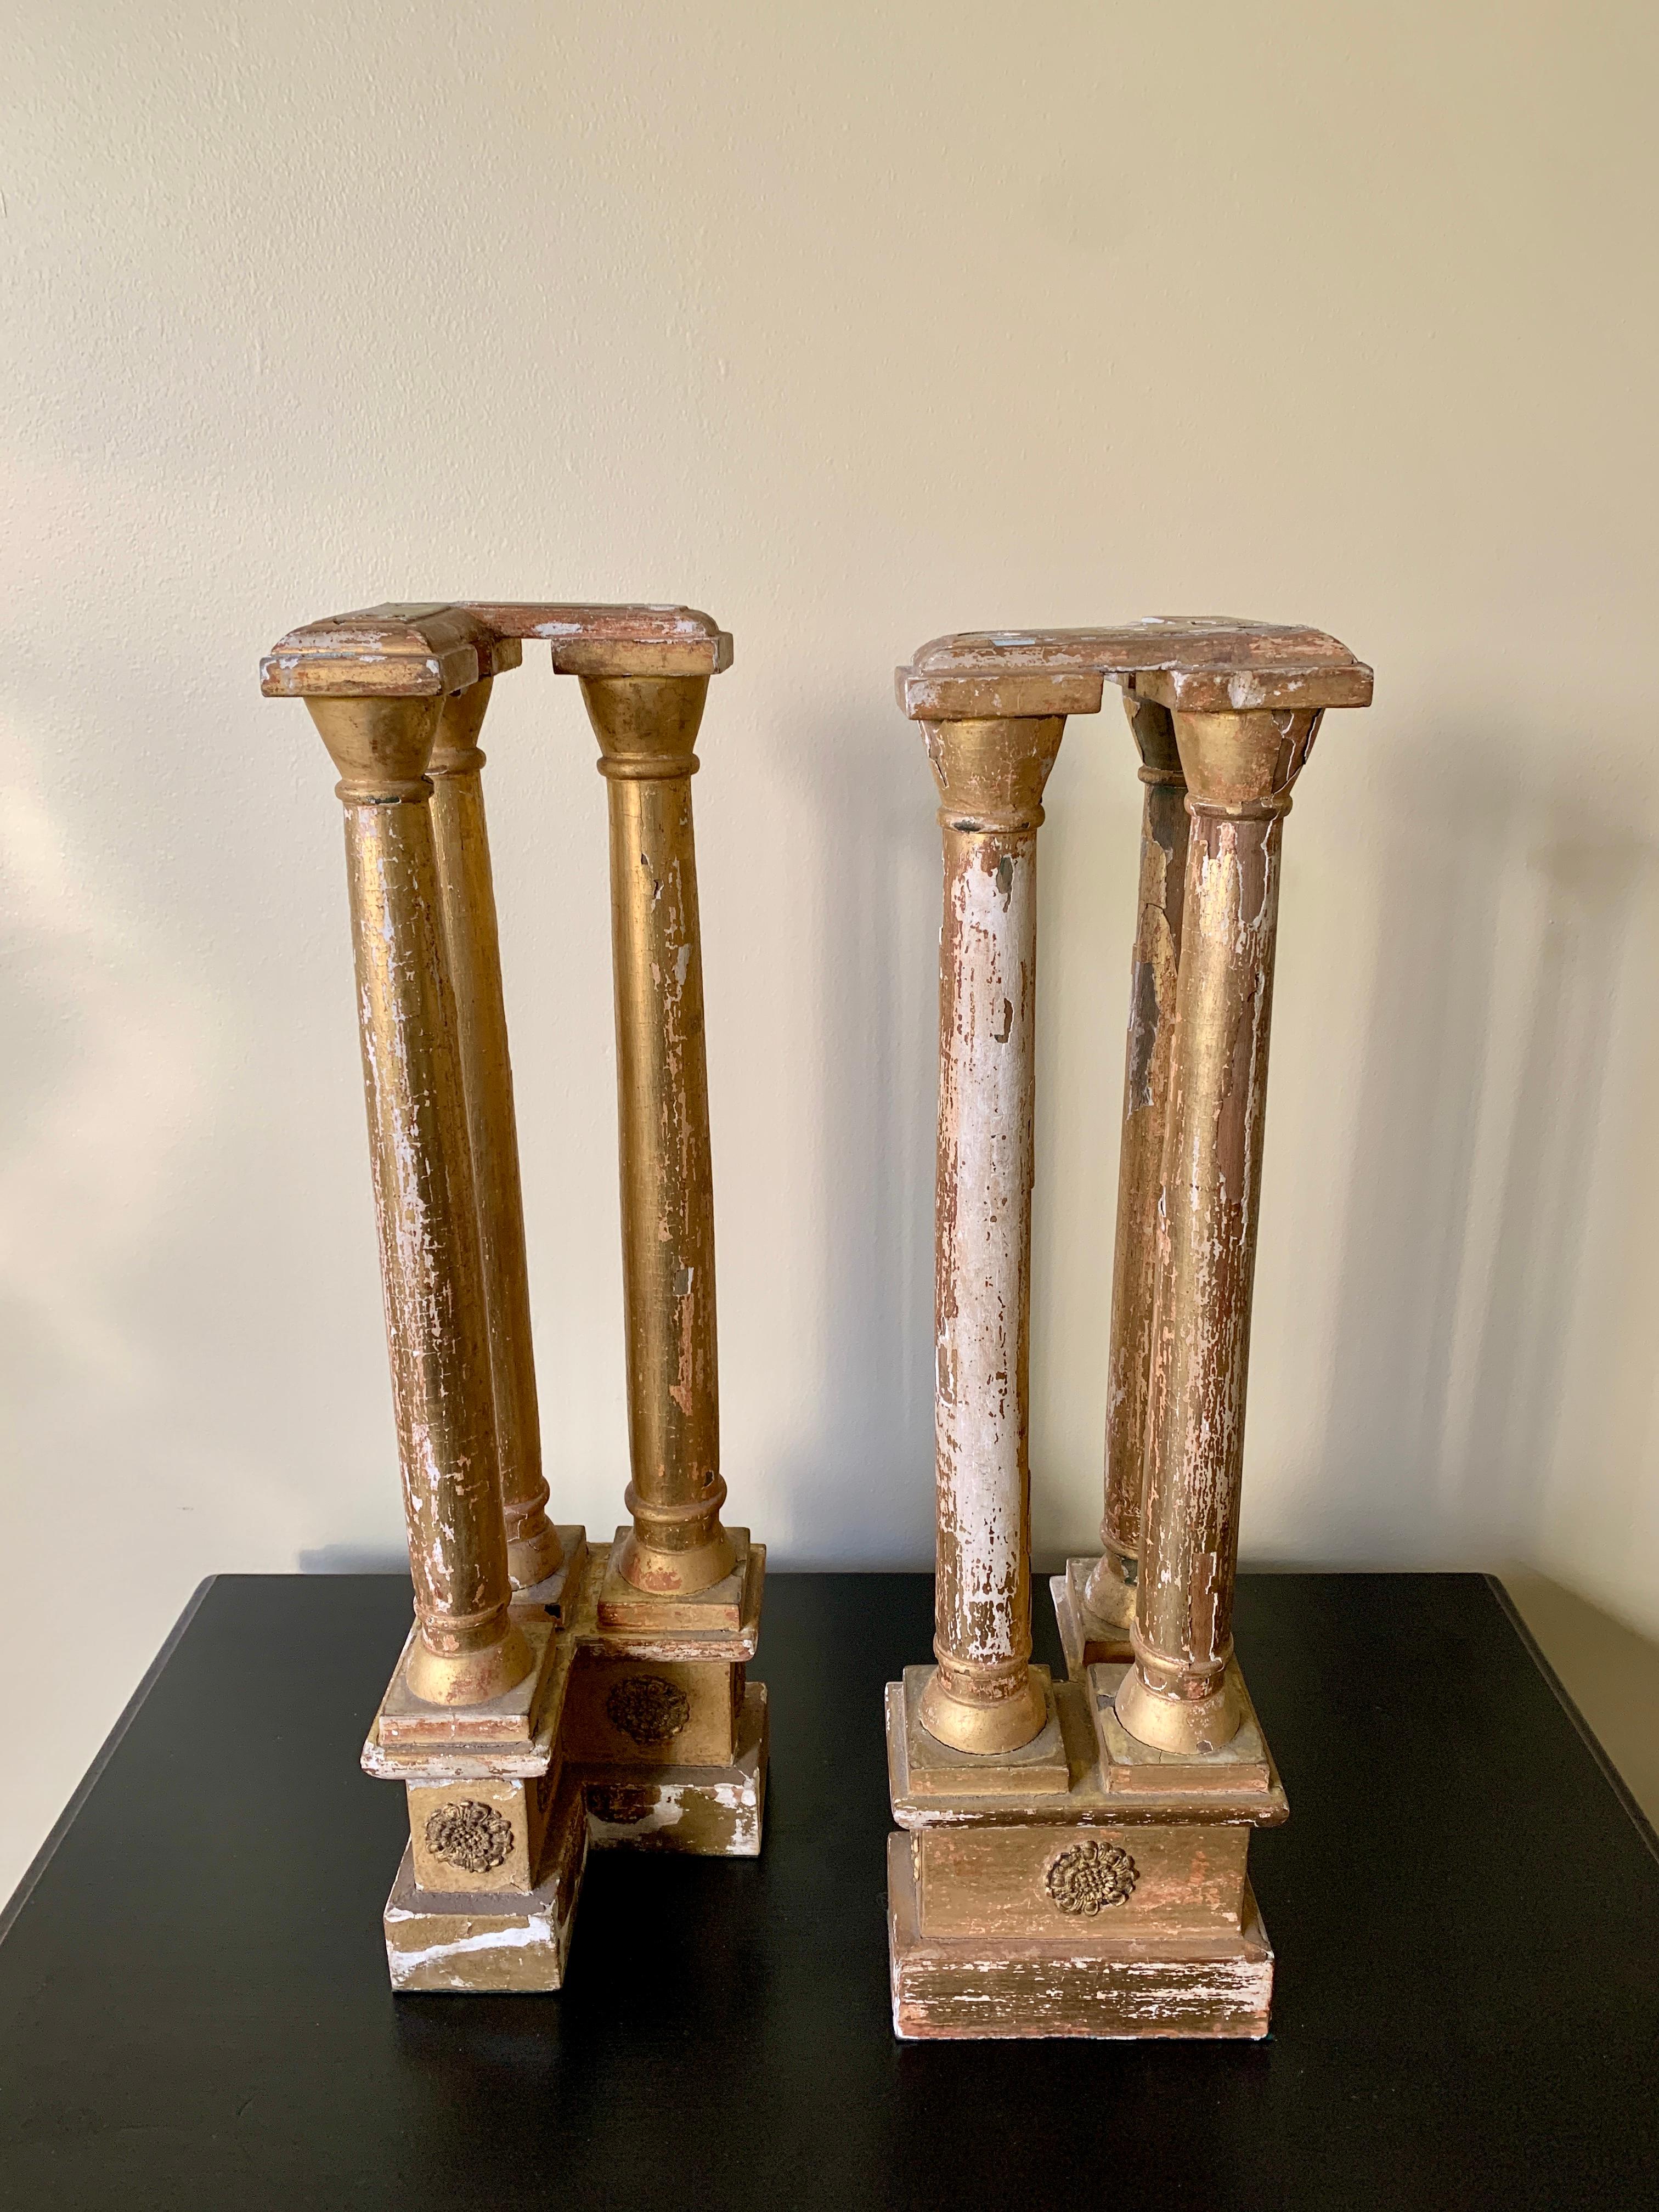 Antique Neoclassical Grand Tour Giltwood Architectural Columns, a Pair For Sale 1